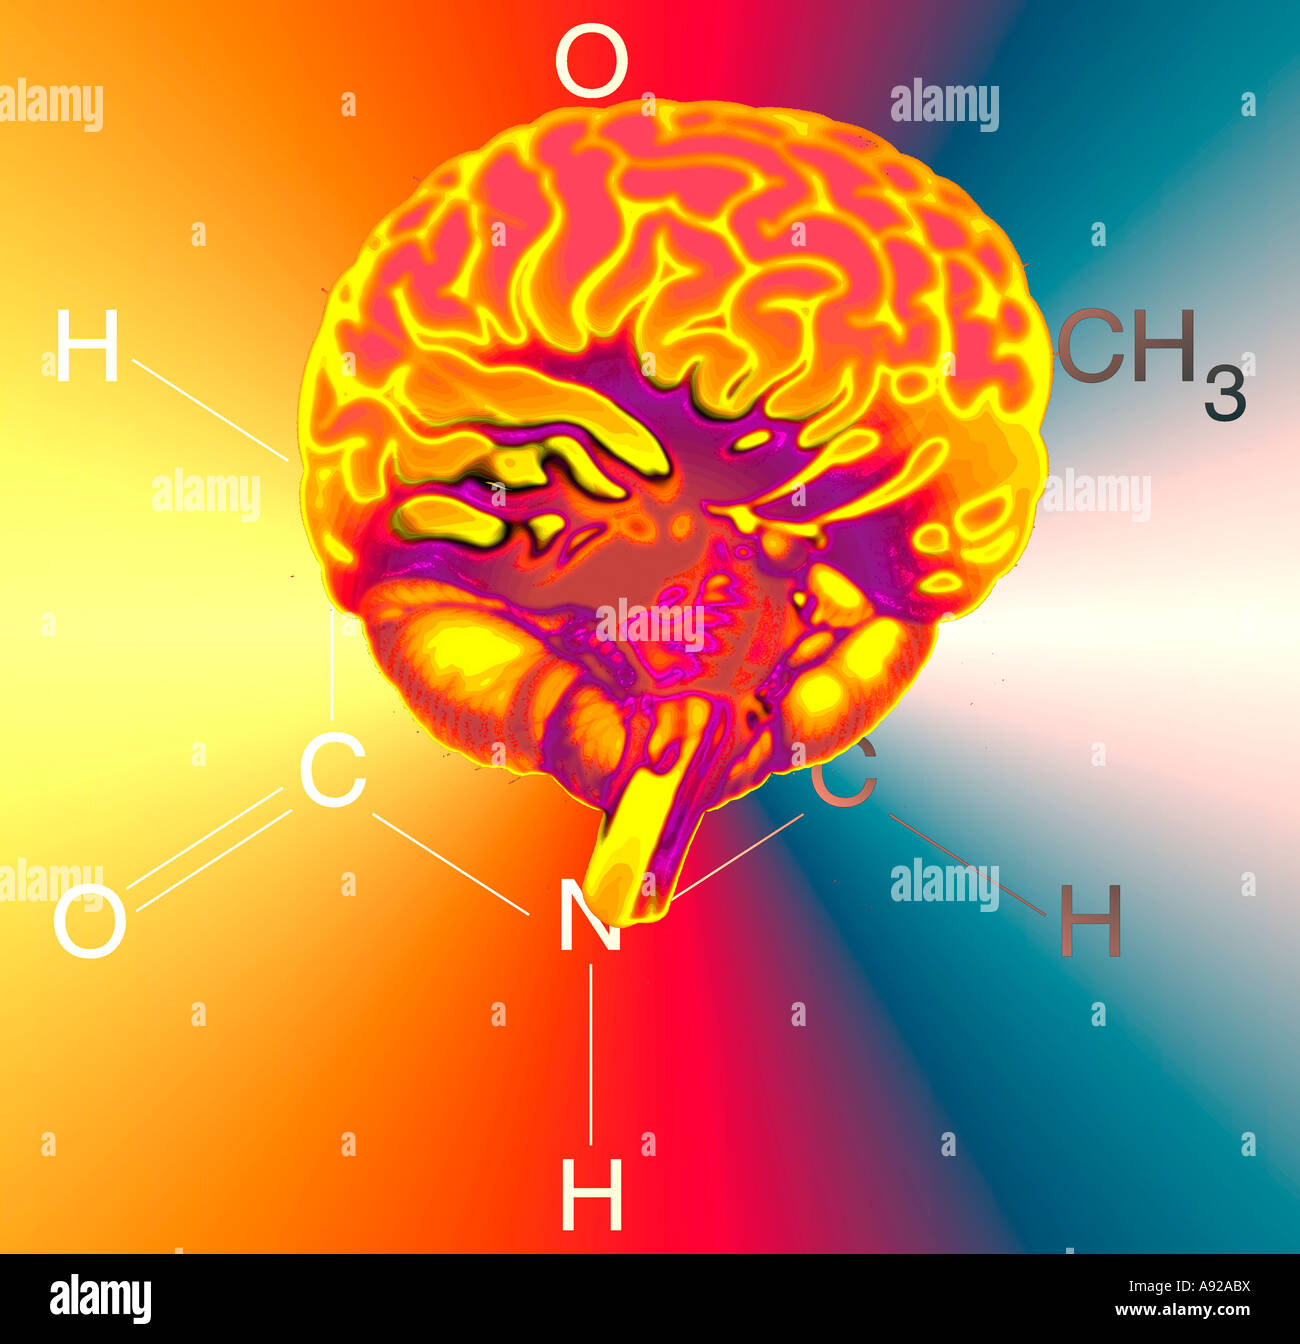 computer generated model of a human brain composited on medical symbols Stock Photo